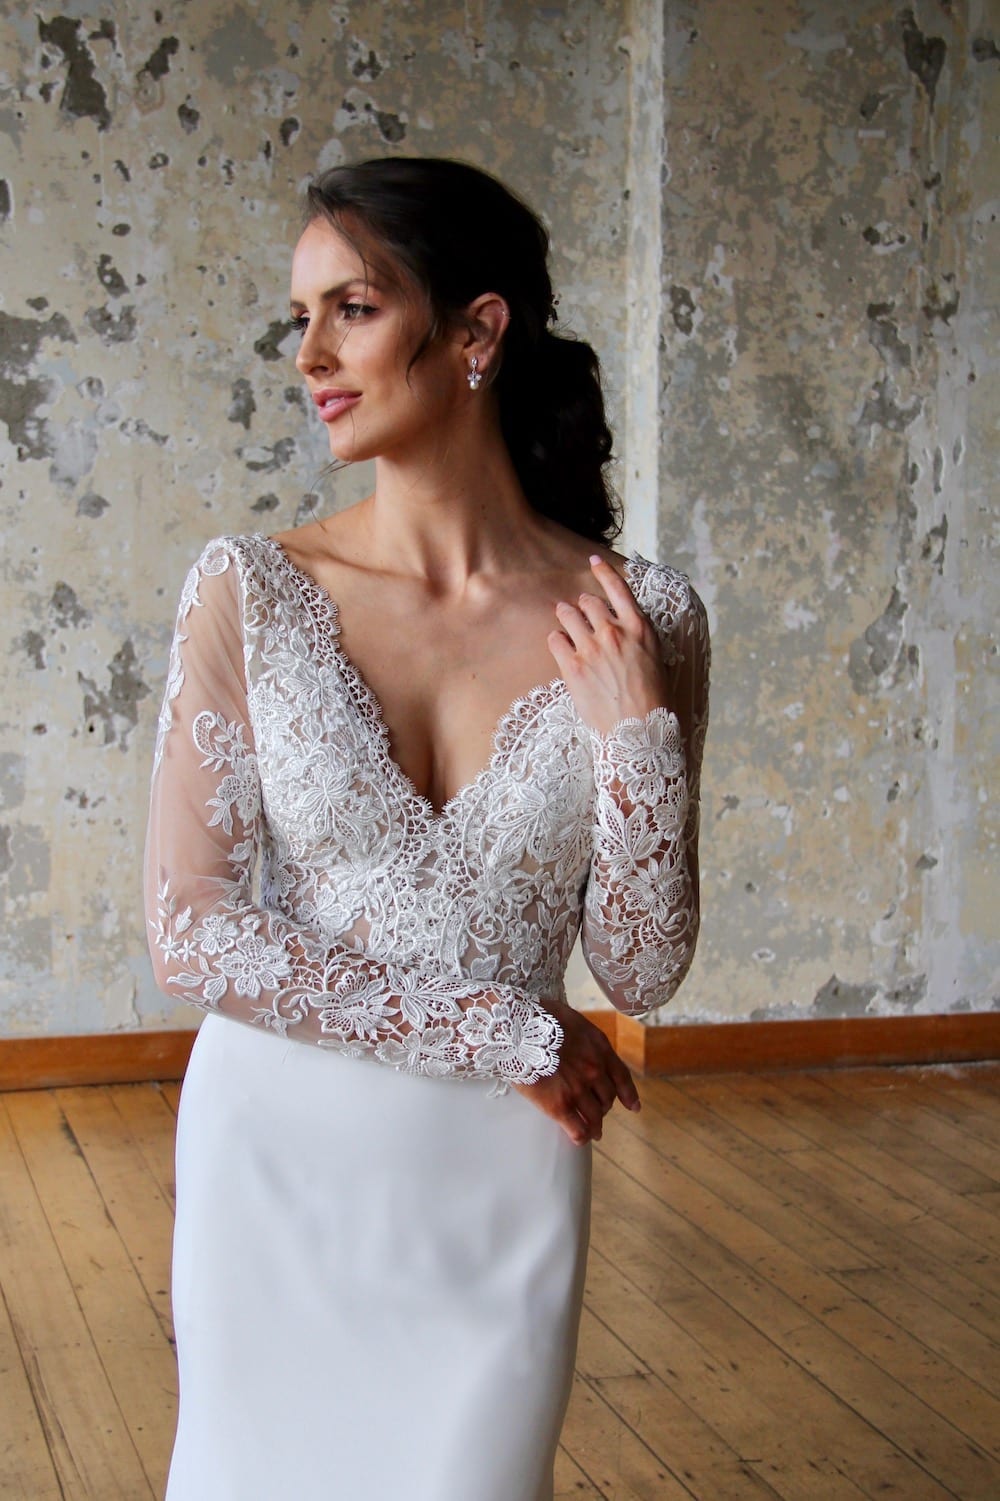 Female model wearing Vinka Design Modern Muse Wedding Dress. In chic warehouse the front detail of a gown with v-neckline, intricate bodice, long lace sleeves, and Bridal crepe skirt.